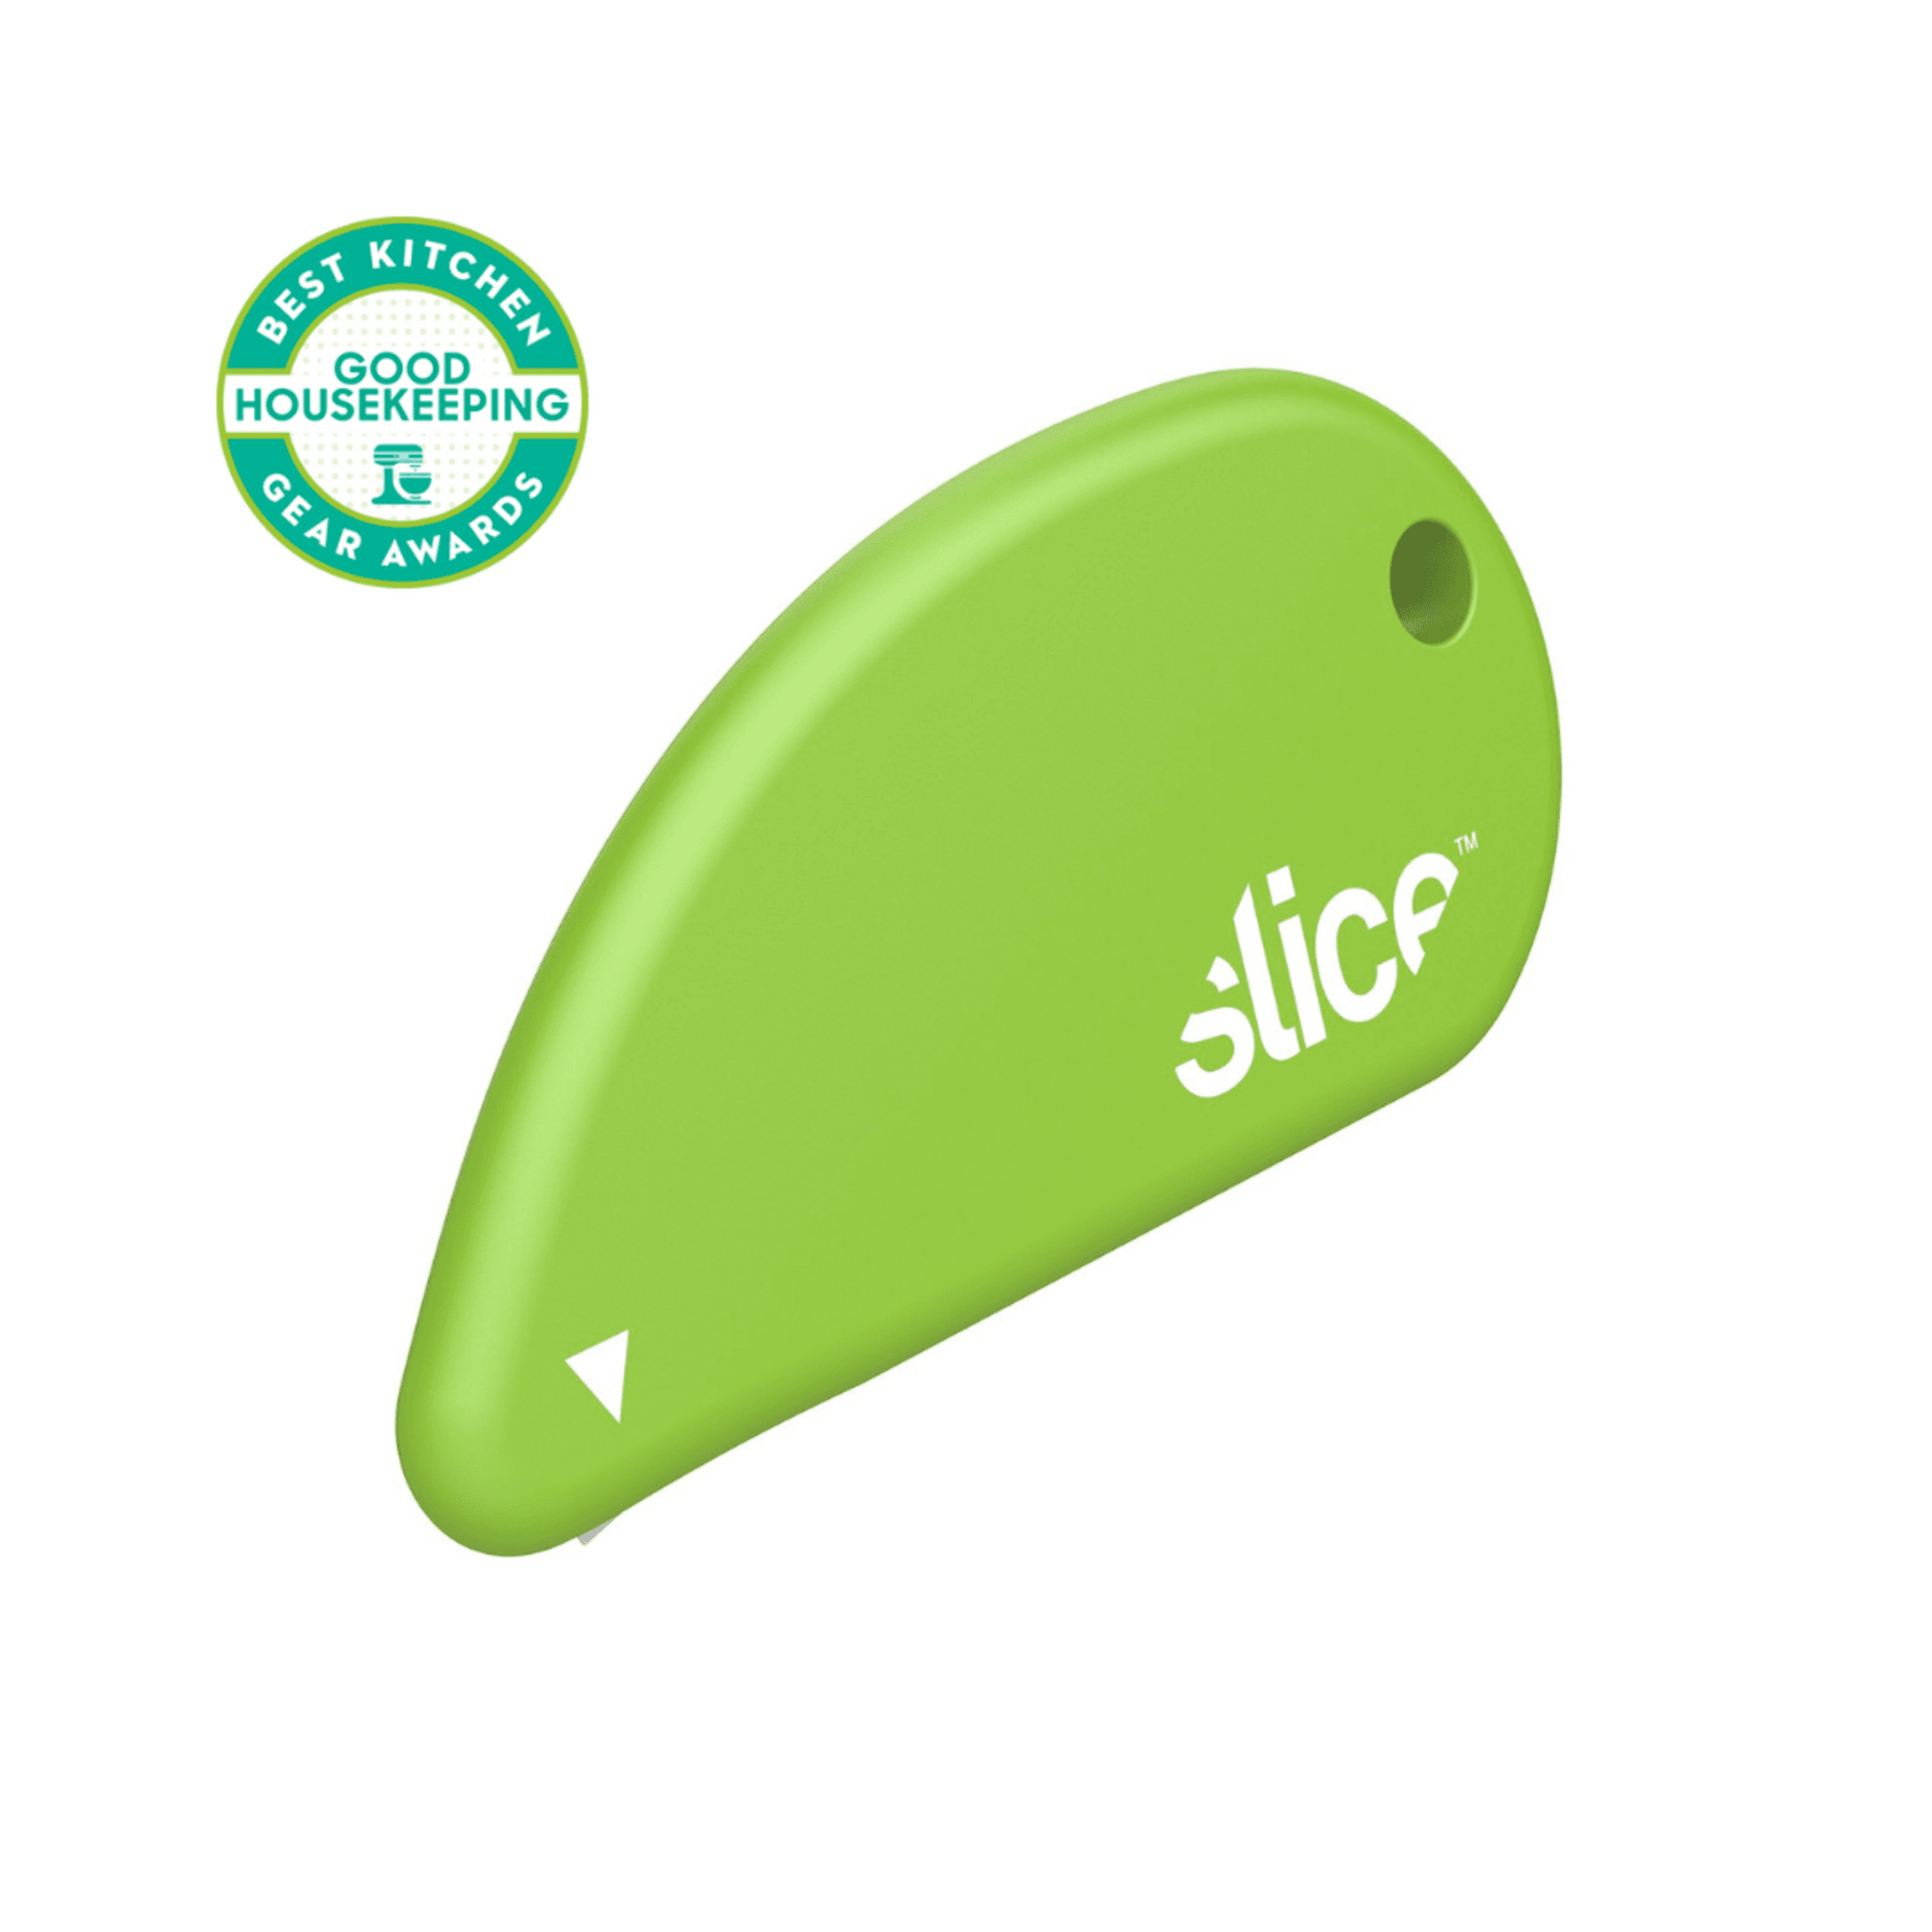 Slice Products Review 